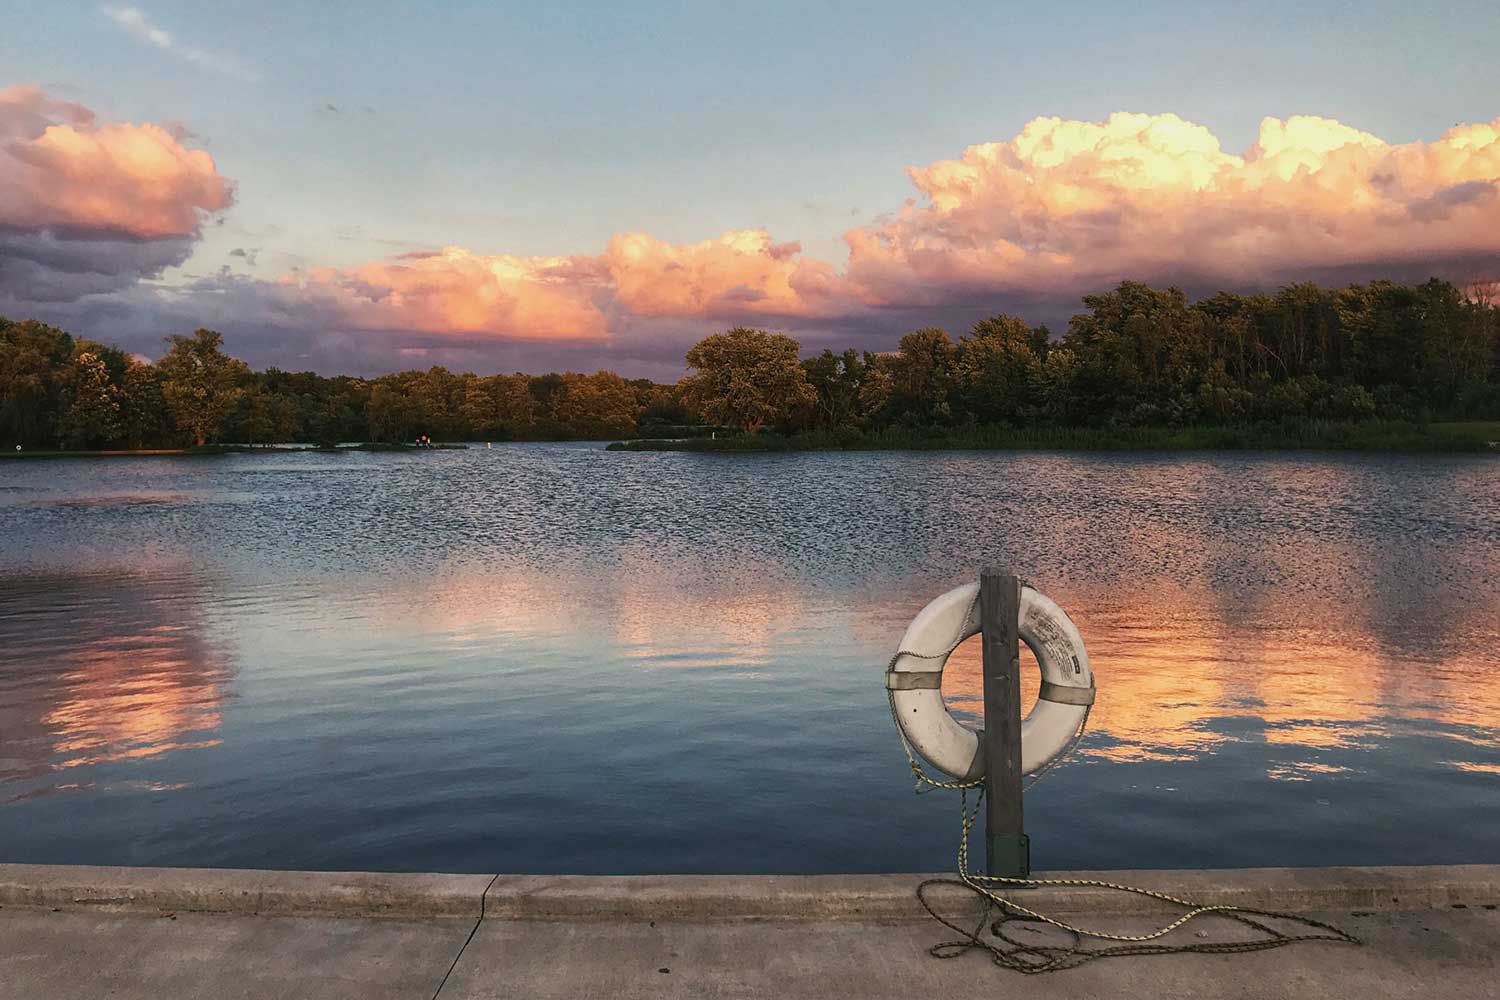 A life preserver in the foreground with a lake and a colorful pinkish sunrise in the background.